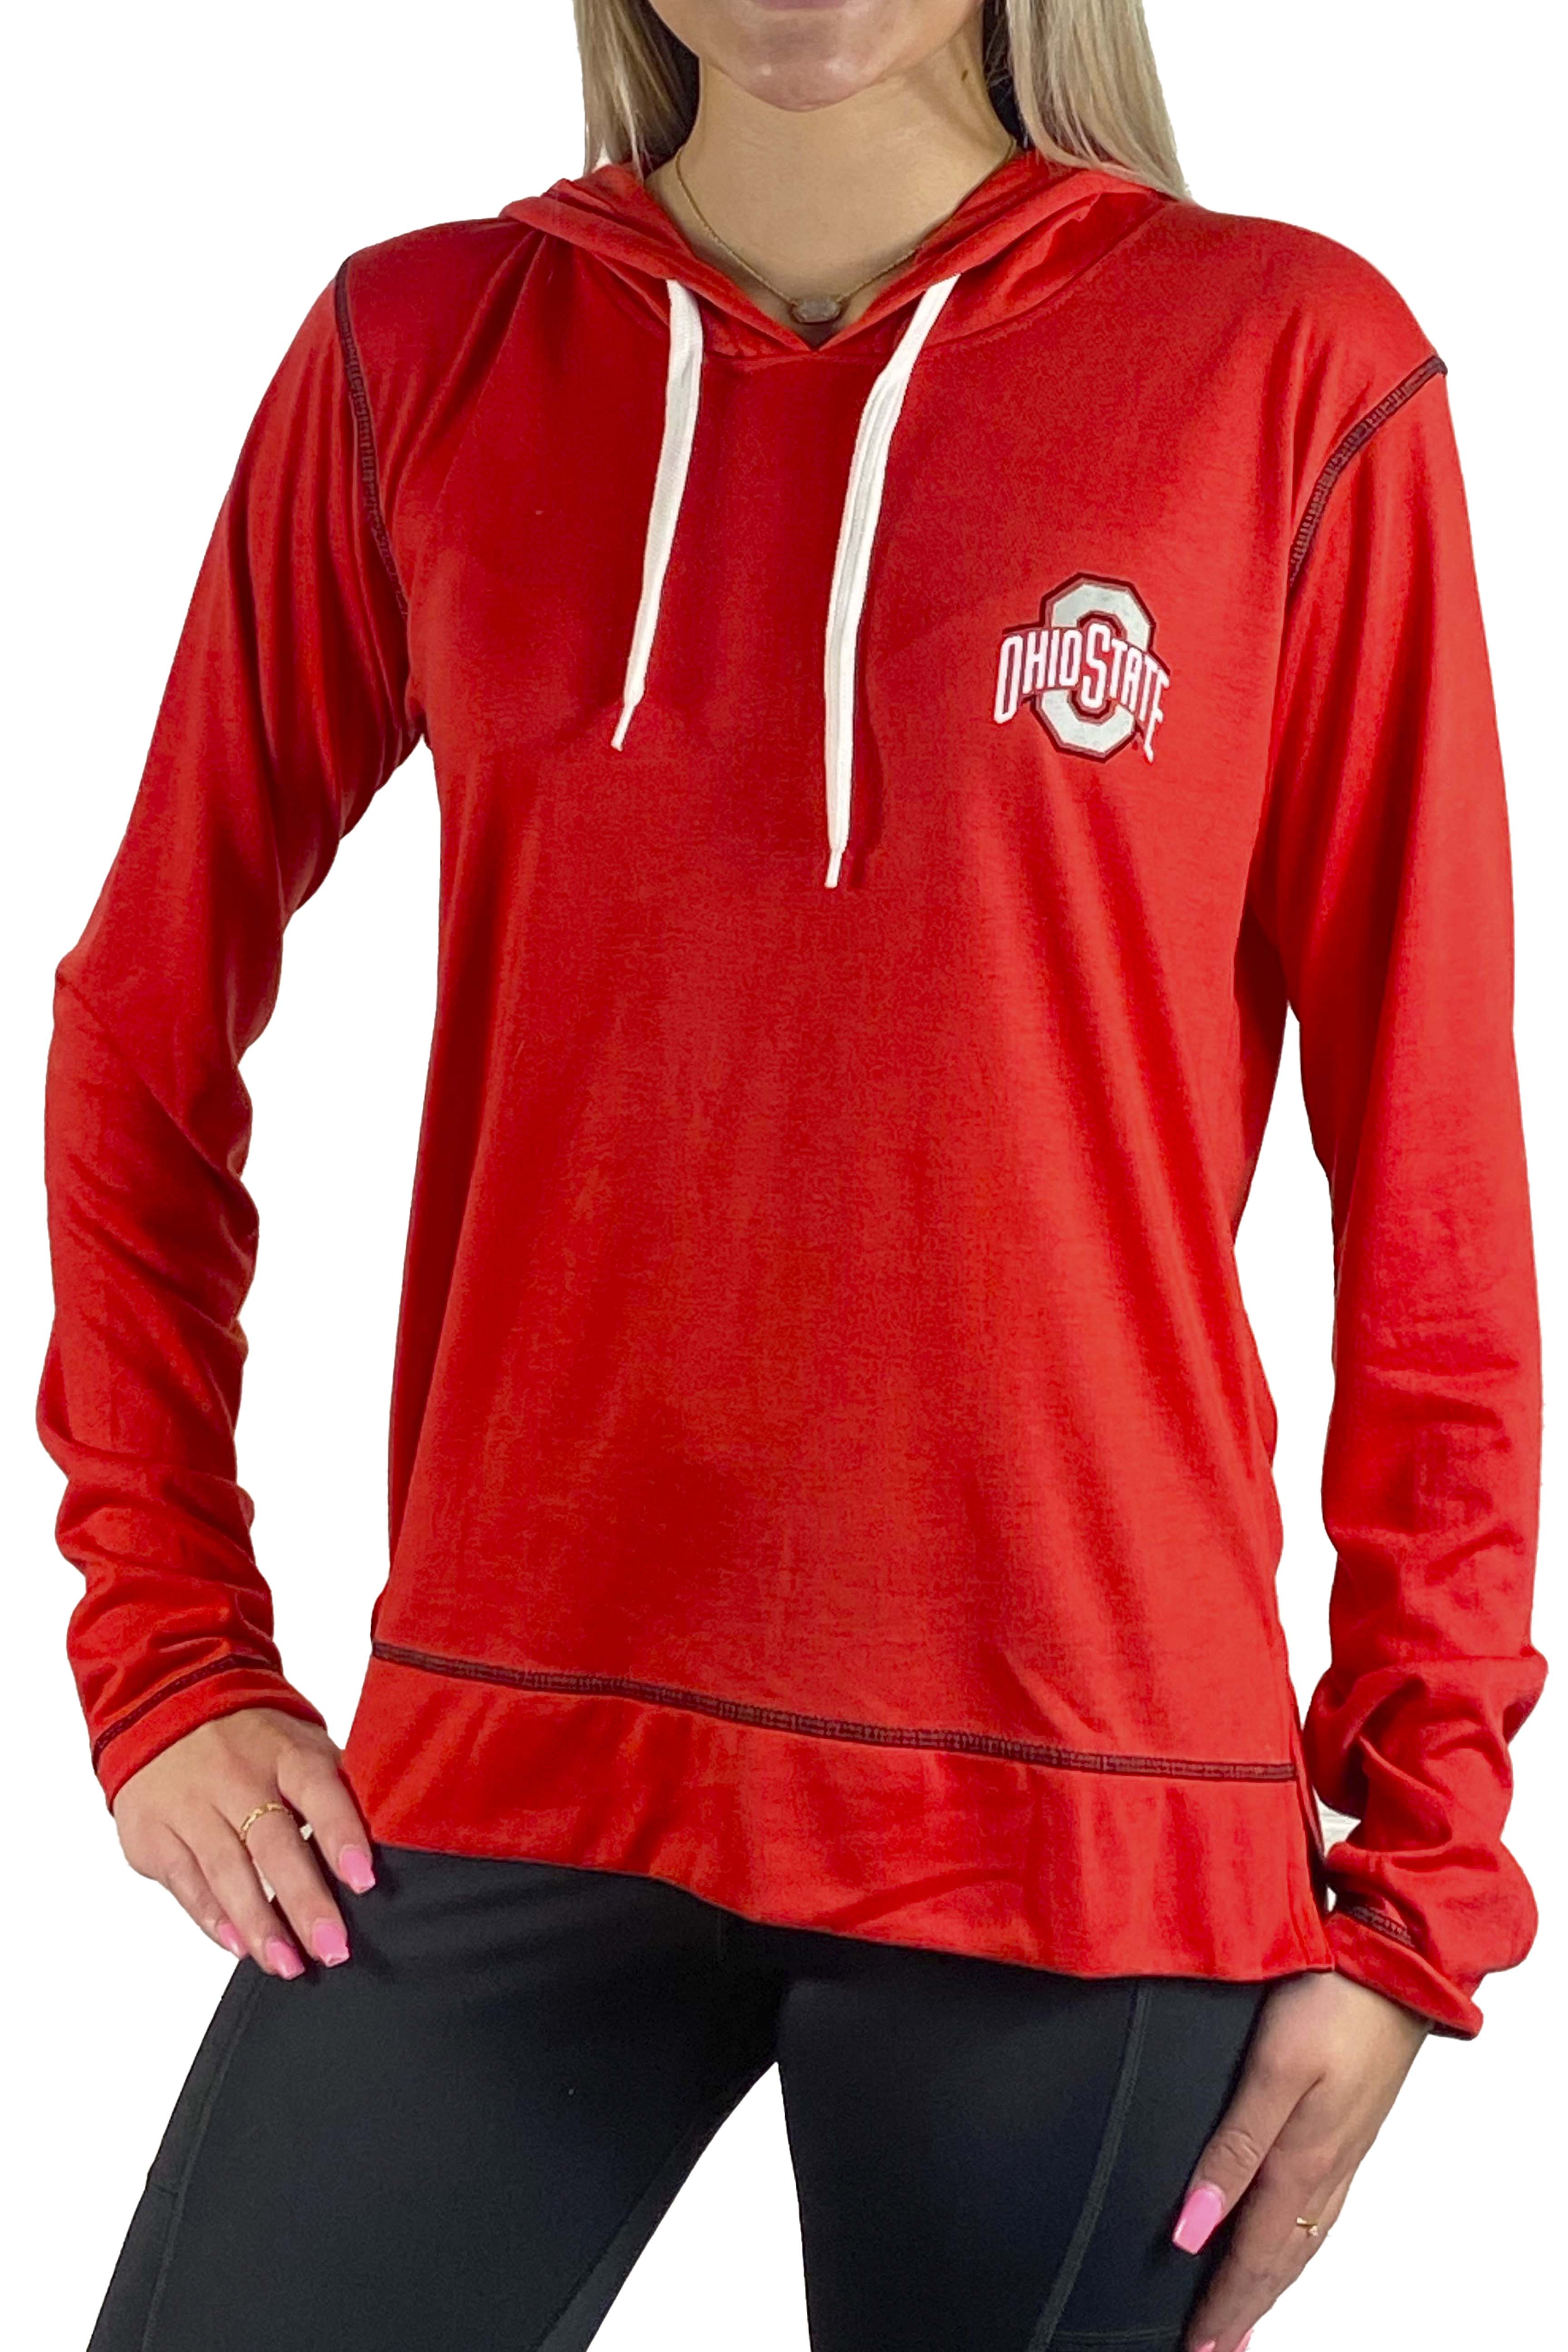 drawstring red hoodie pullover with white drawstrings.